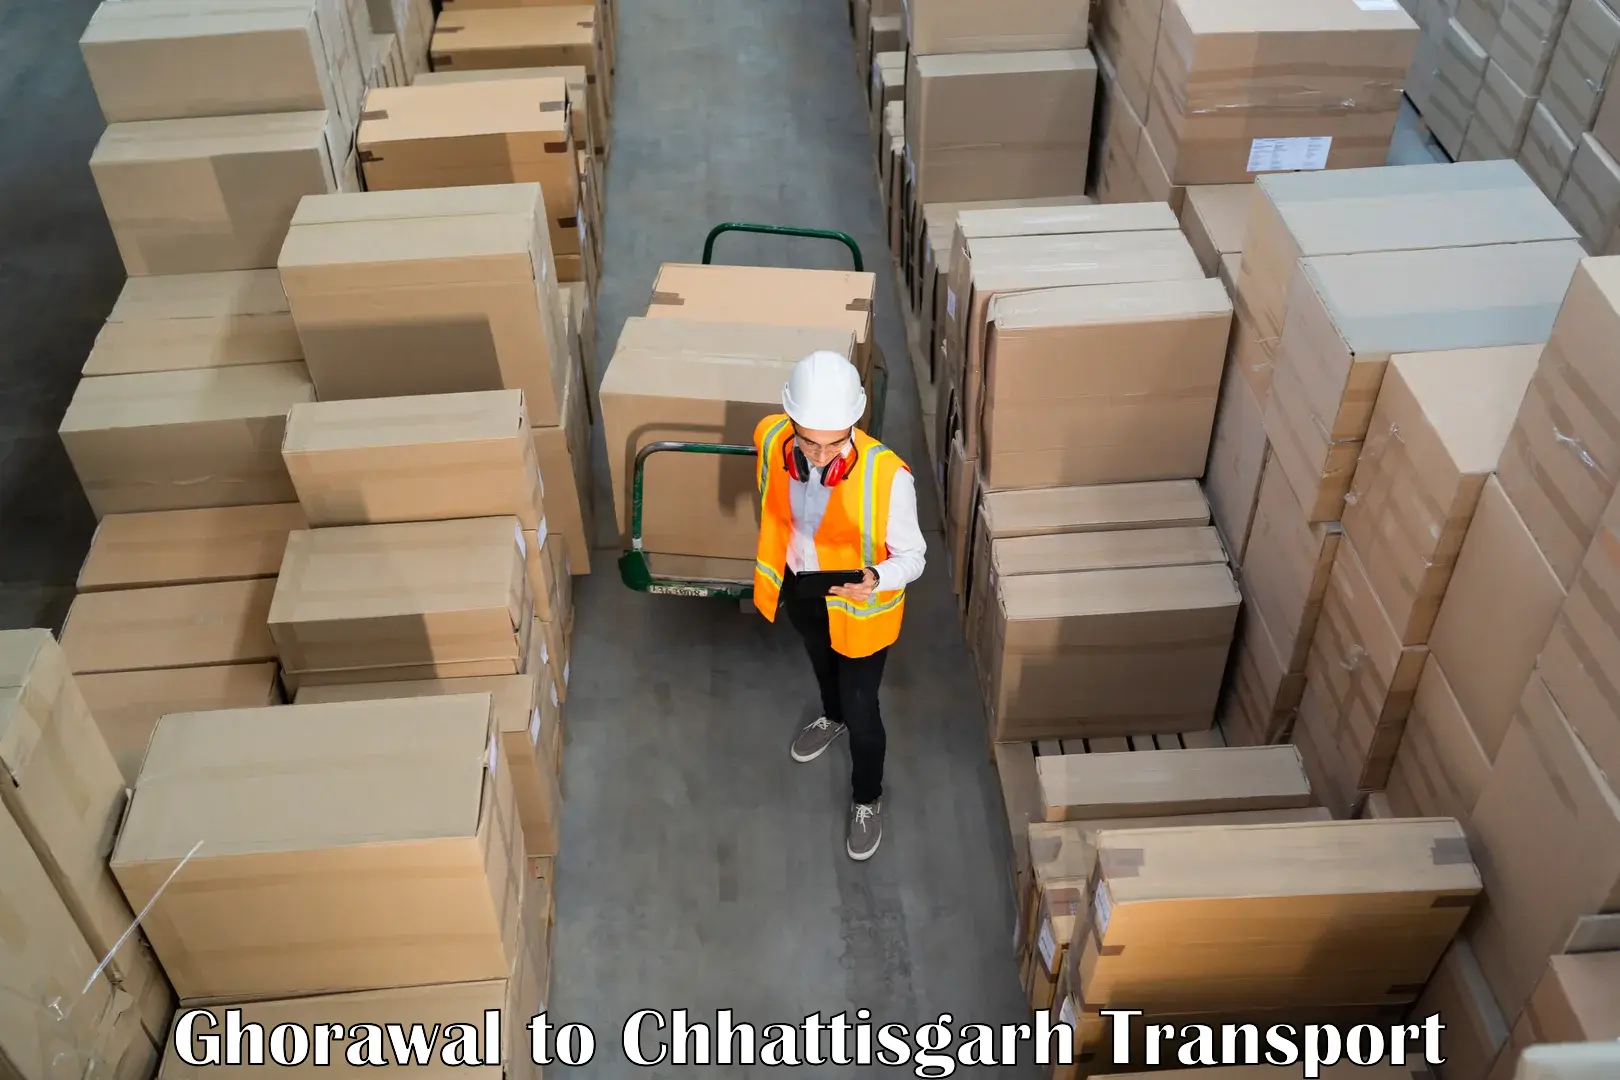 Part load transport service in India Ghorawal to Bhatgaon